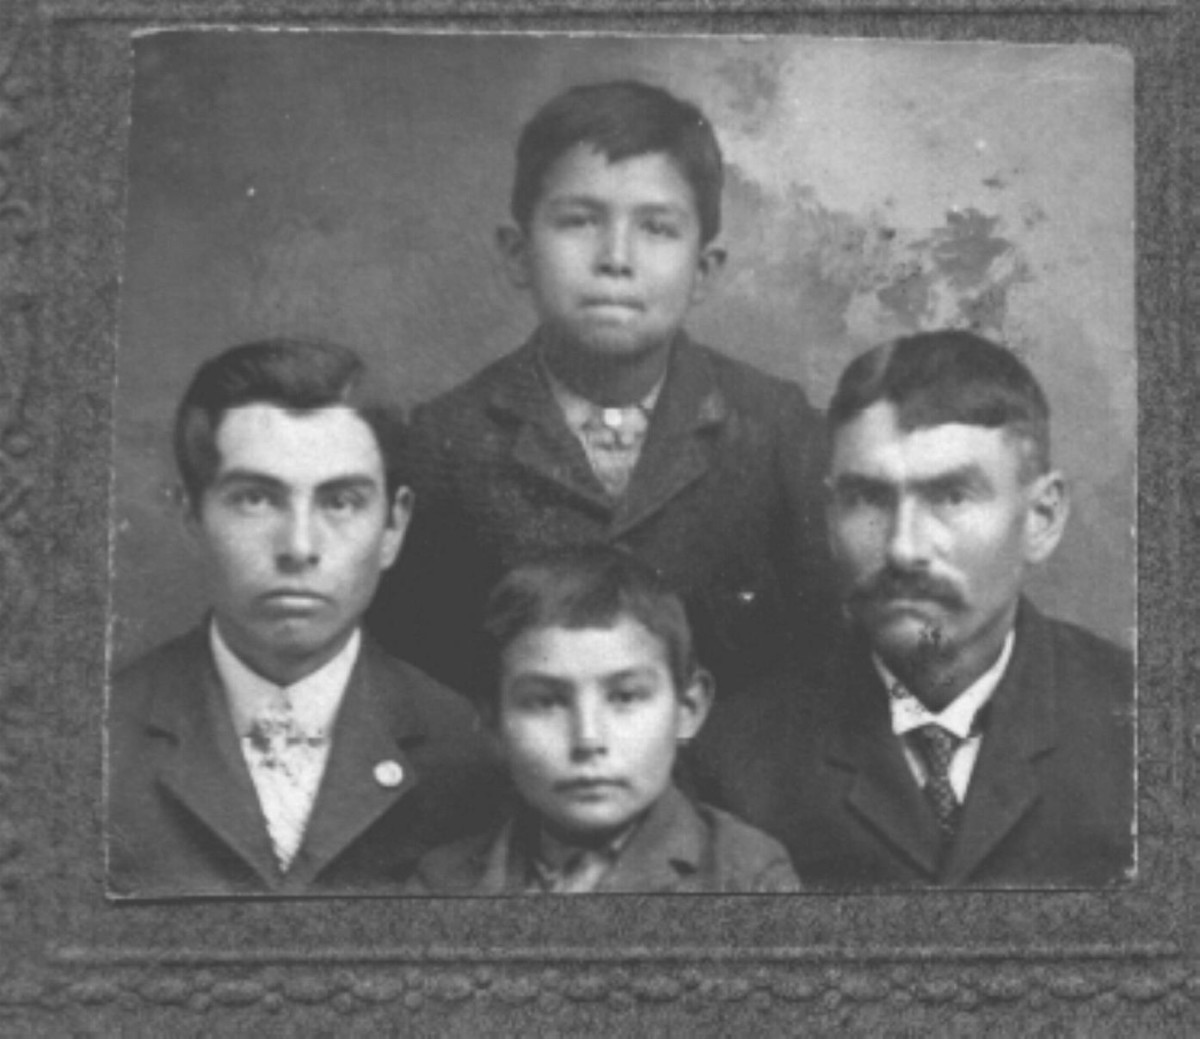 Members of the Sherman family including Mark Sherman, who died while escaping the Rapid City Indian School. In order: Top row, Mark Sherman; Second Row, William and Frank Sherman; bottom row George Sherman. (Photo courtesy of Ben Sherman)